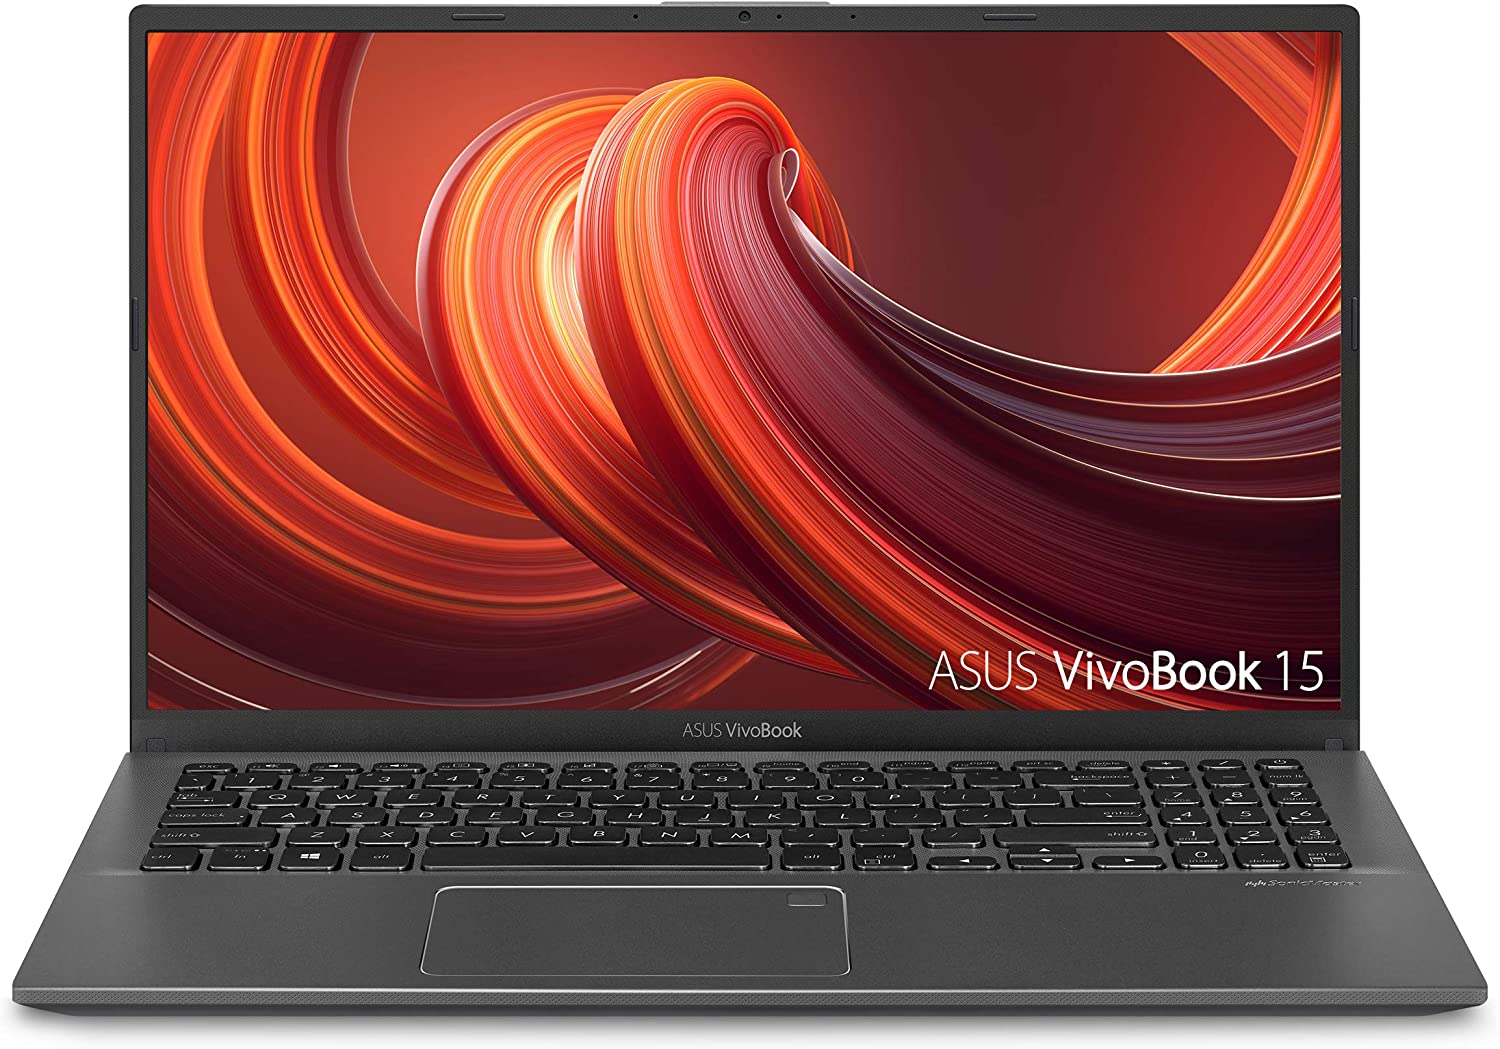 <strong>ASUS VivoBook 15 Thin and Light Laptop</strong>